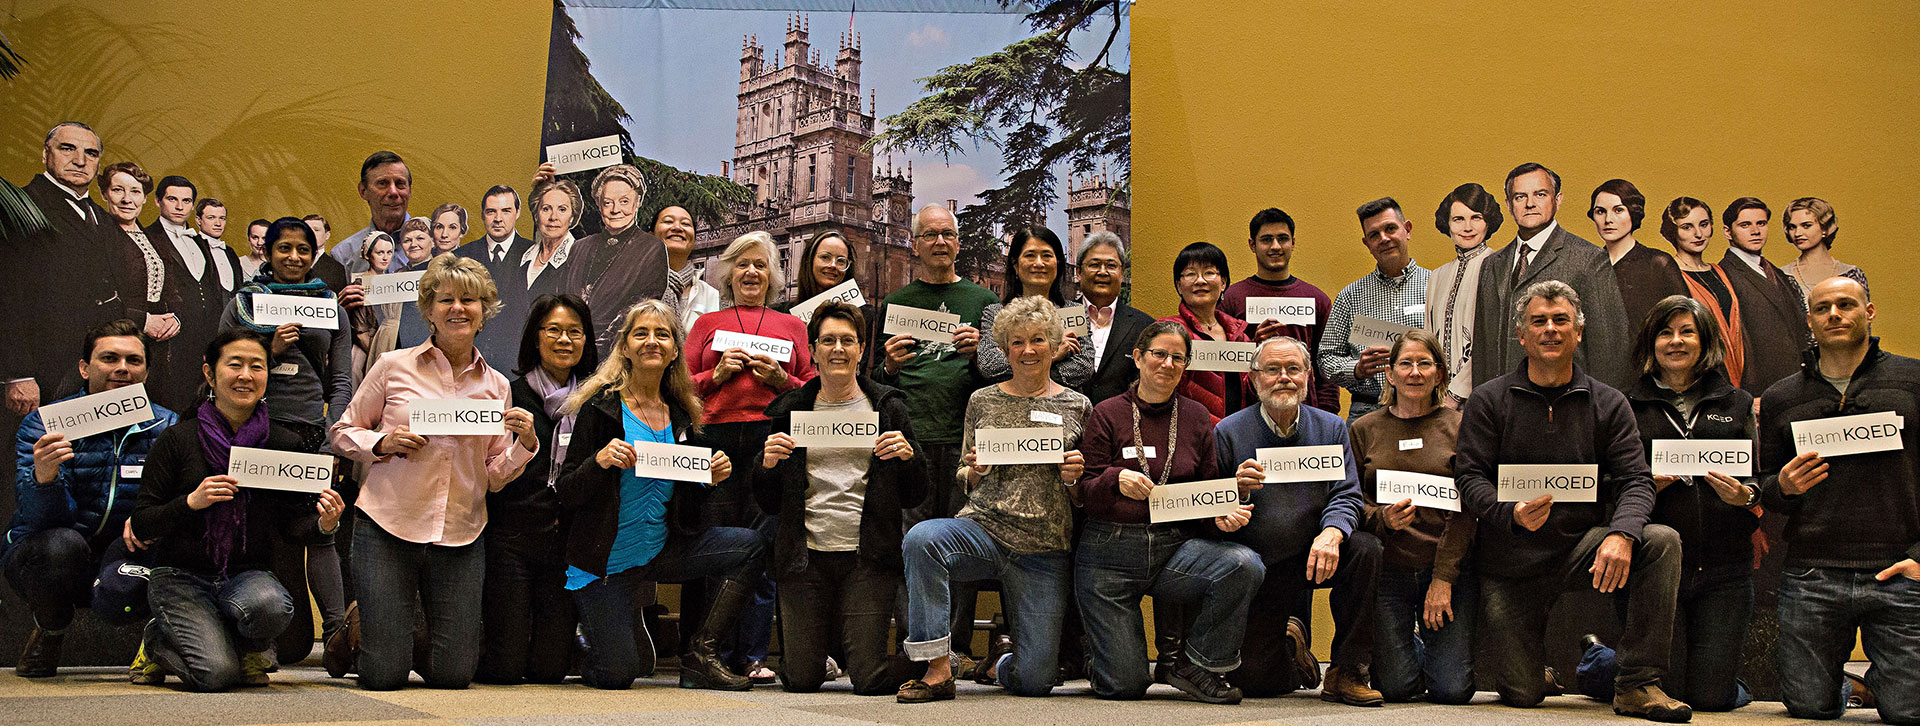 KQED Pledge Volunteers Standing in front of Downton Abbey backdrop